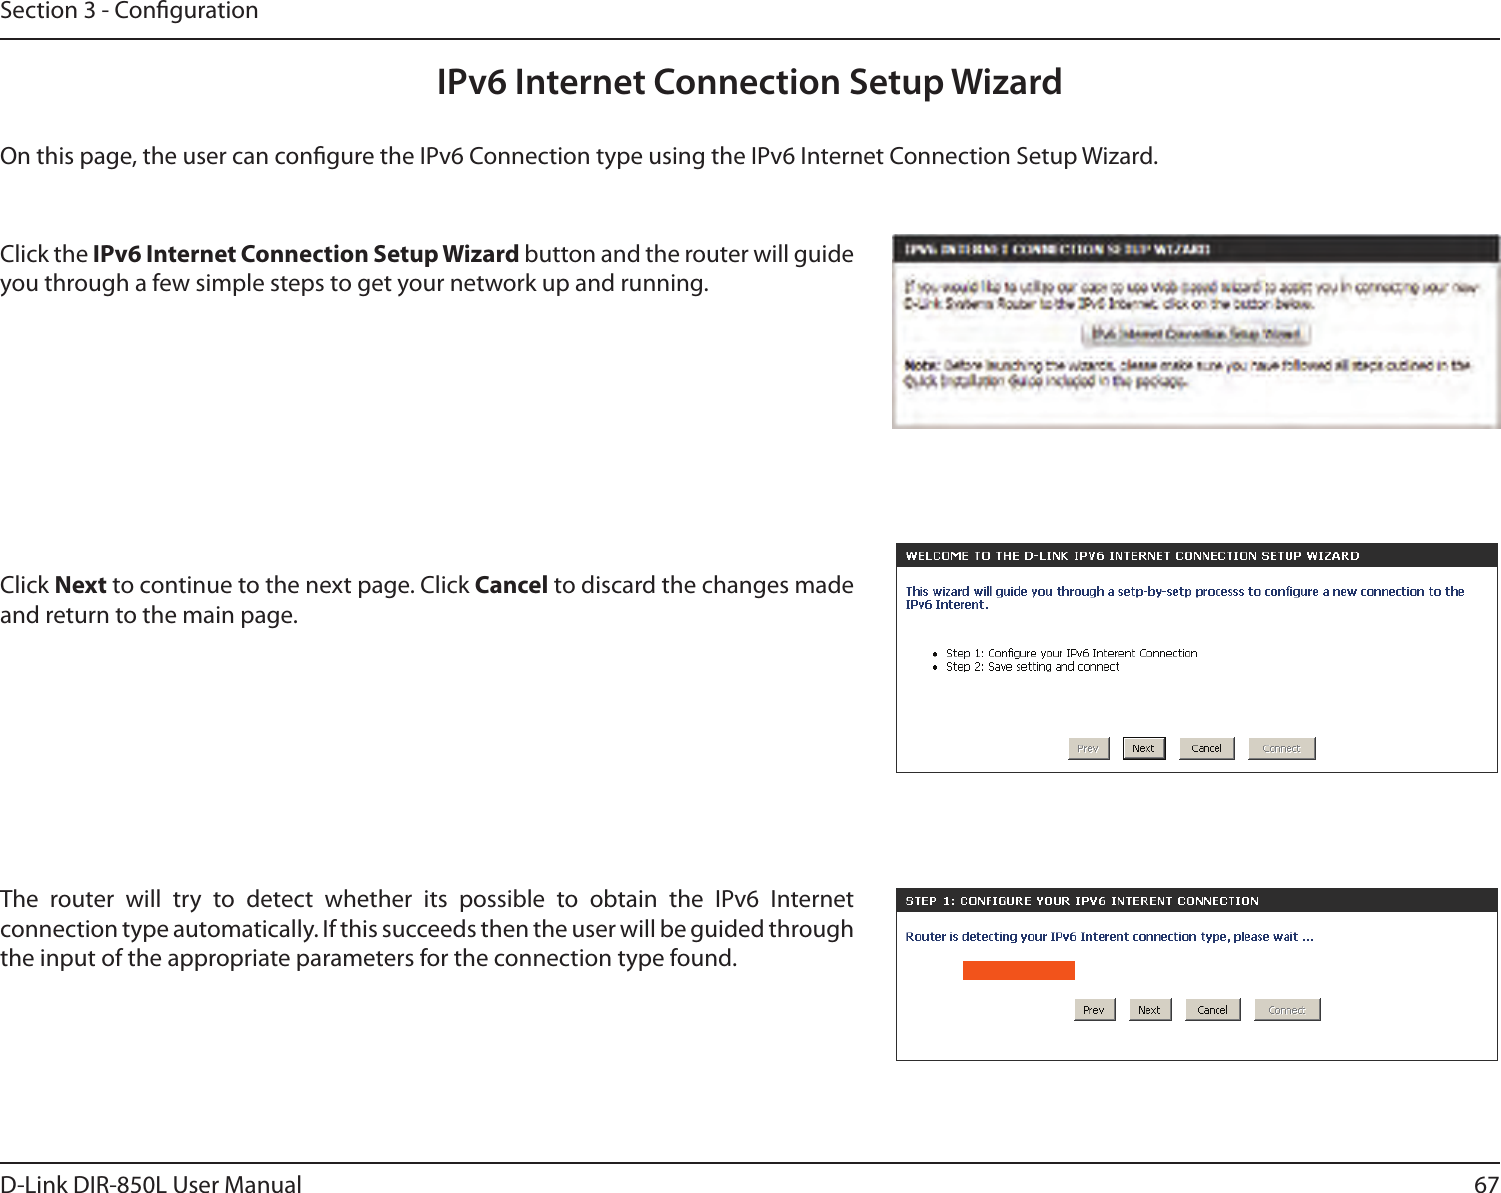 67D-Link DIR-850L User ManualSection 3 - CongurationIPv6 Internet Connection Setup WizardOn this page, the user can congure the IPv6 Connection type using the IPv6 Internet Connection Setup Wizard.Click the IPv6 Internet Connection Setup Wizard button and the router will guide you through a few simple steps to get your network up and running.Click Next to continue to the next page. Click Cancel to discard the changes made and return to the main page.The  router  will  try  to  detect  whether  its  possible  to  obtain  the  IPv6  Internet connection type automatically. If this succeeds then the user will be guided through the input of the appropriate parameters for the connection type found.